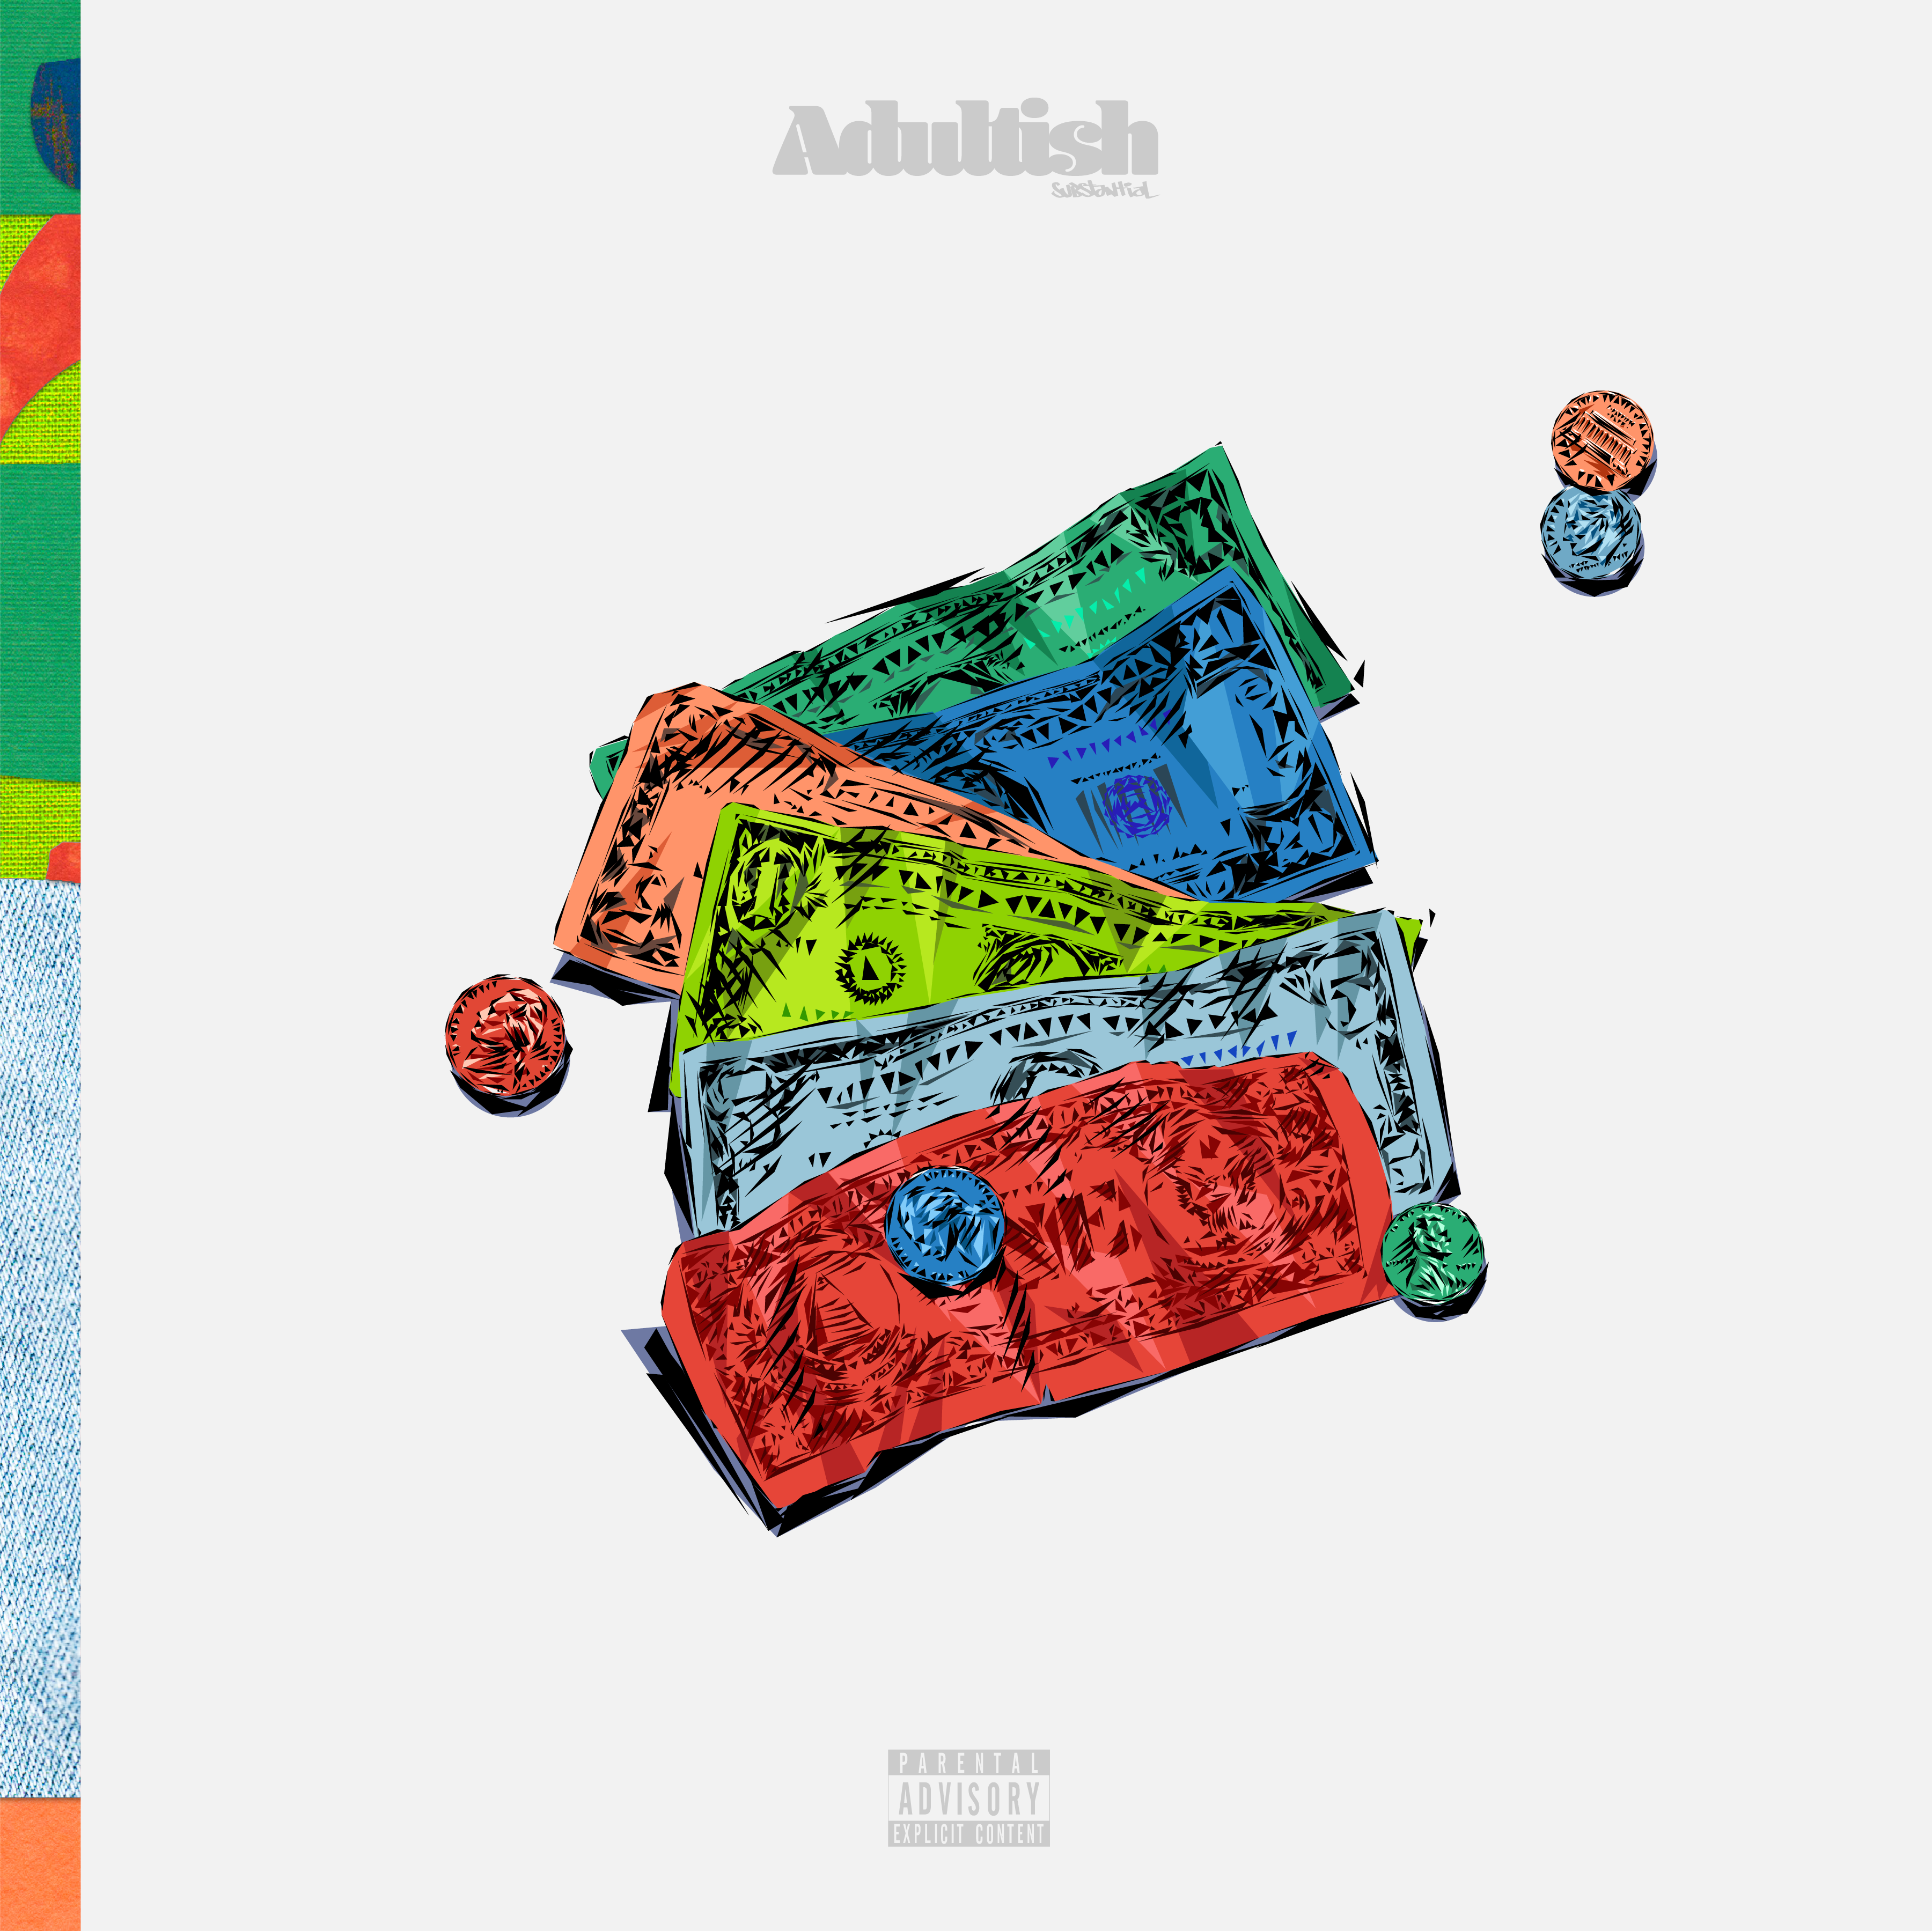 Substantial - Adultish (Deluxe Edition) thumbnail